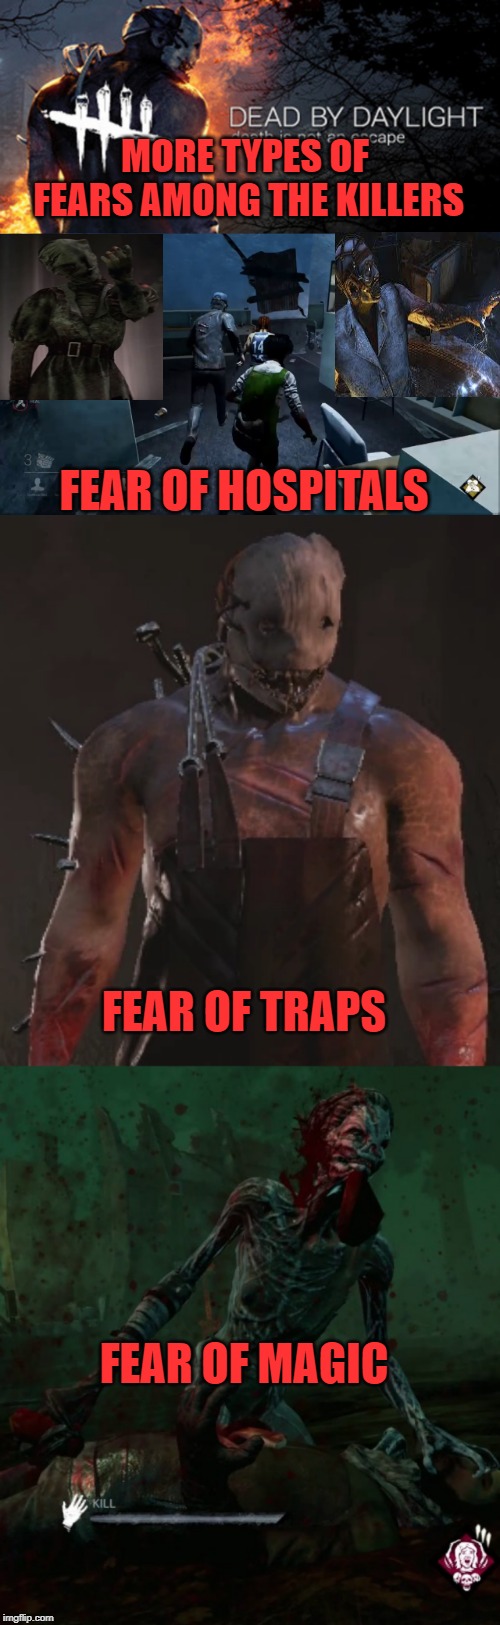 MORE TYPES OF FEARS AMONG THE KILLERS; FEAR OF HOSPITALS; FEAR OF TRAPS; FEAR OF MAGIC | image tagged in horror,video game,fear | made w/ Imgflip meme maker